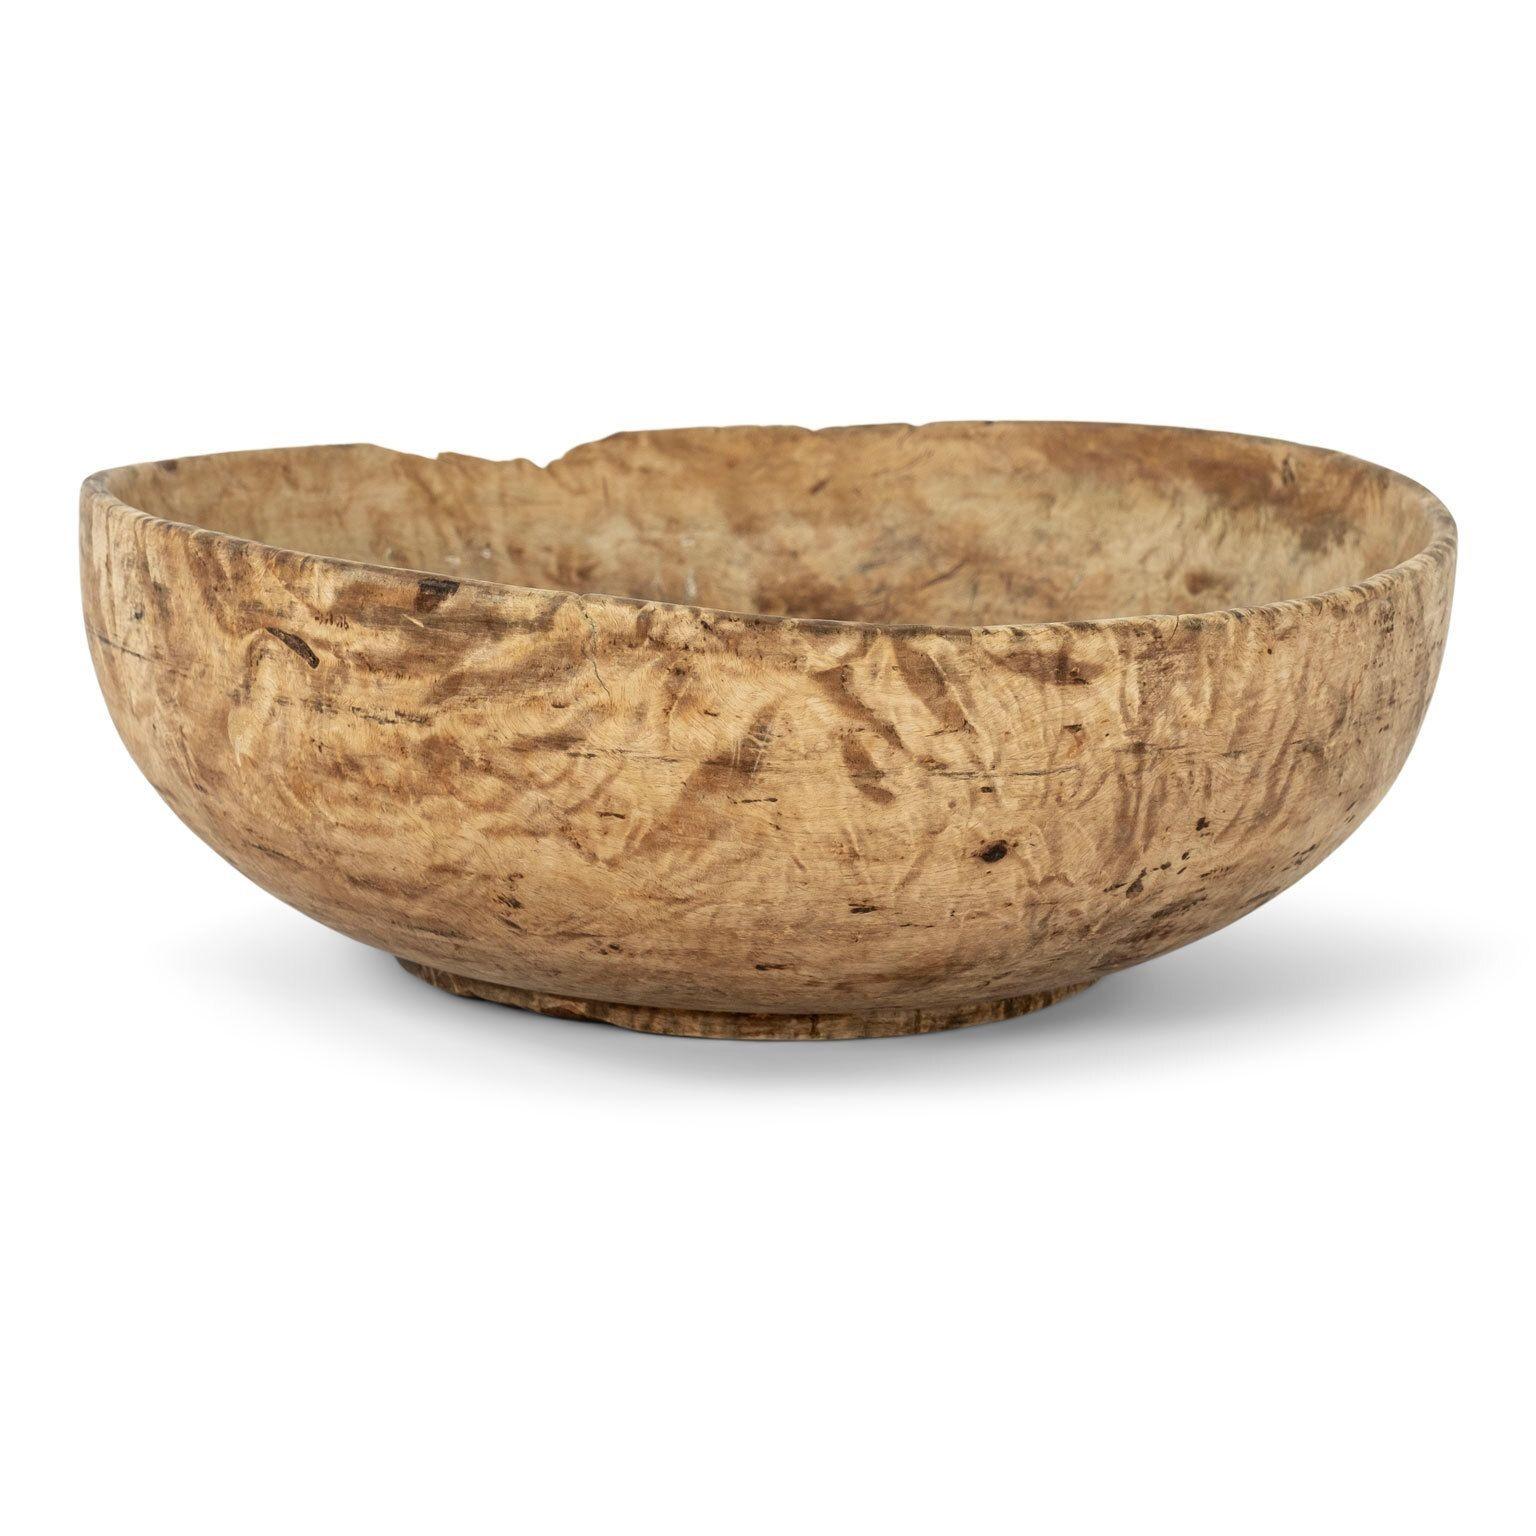 Round Swedish root wood bowl: large hand-carved round burled root wood bowl with nice patina and coloration.